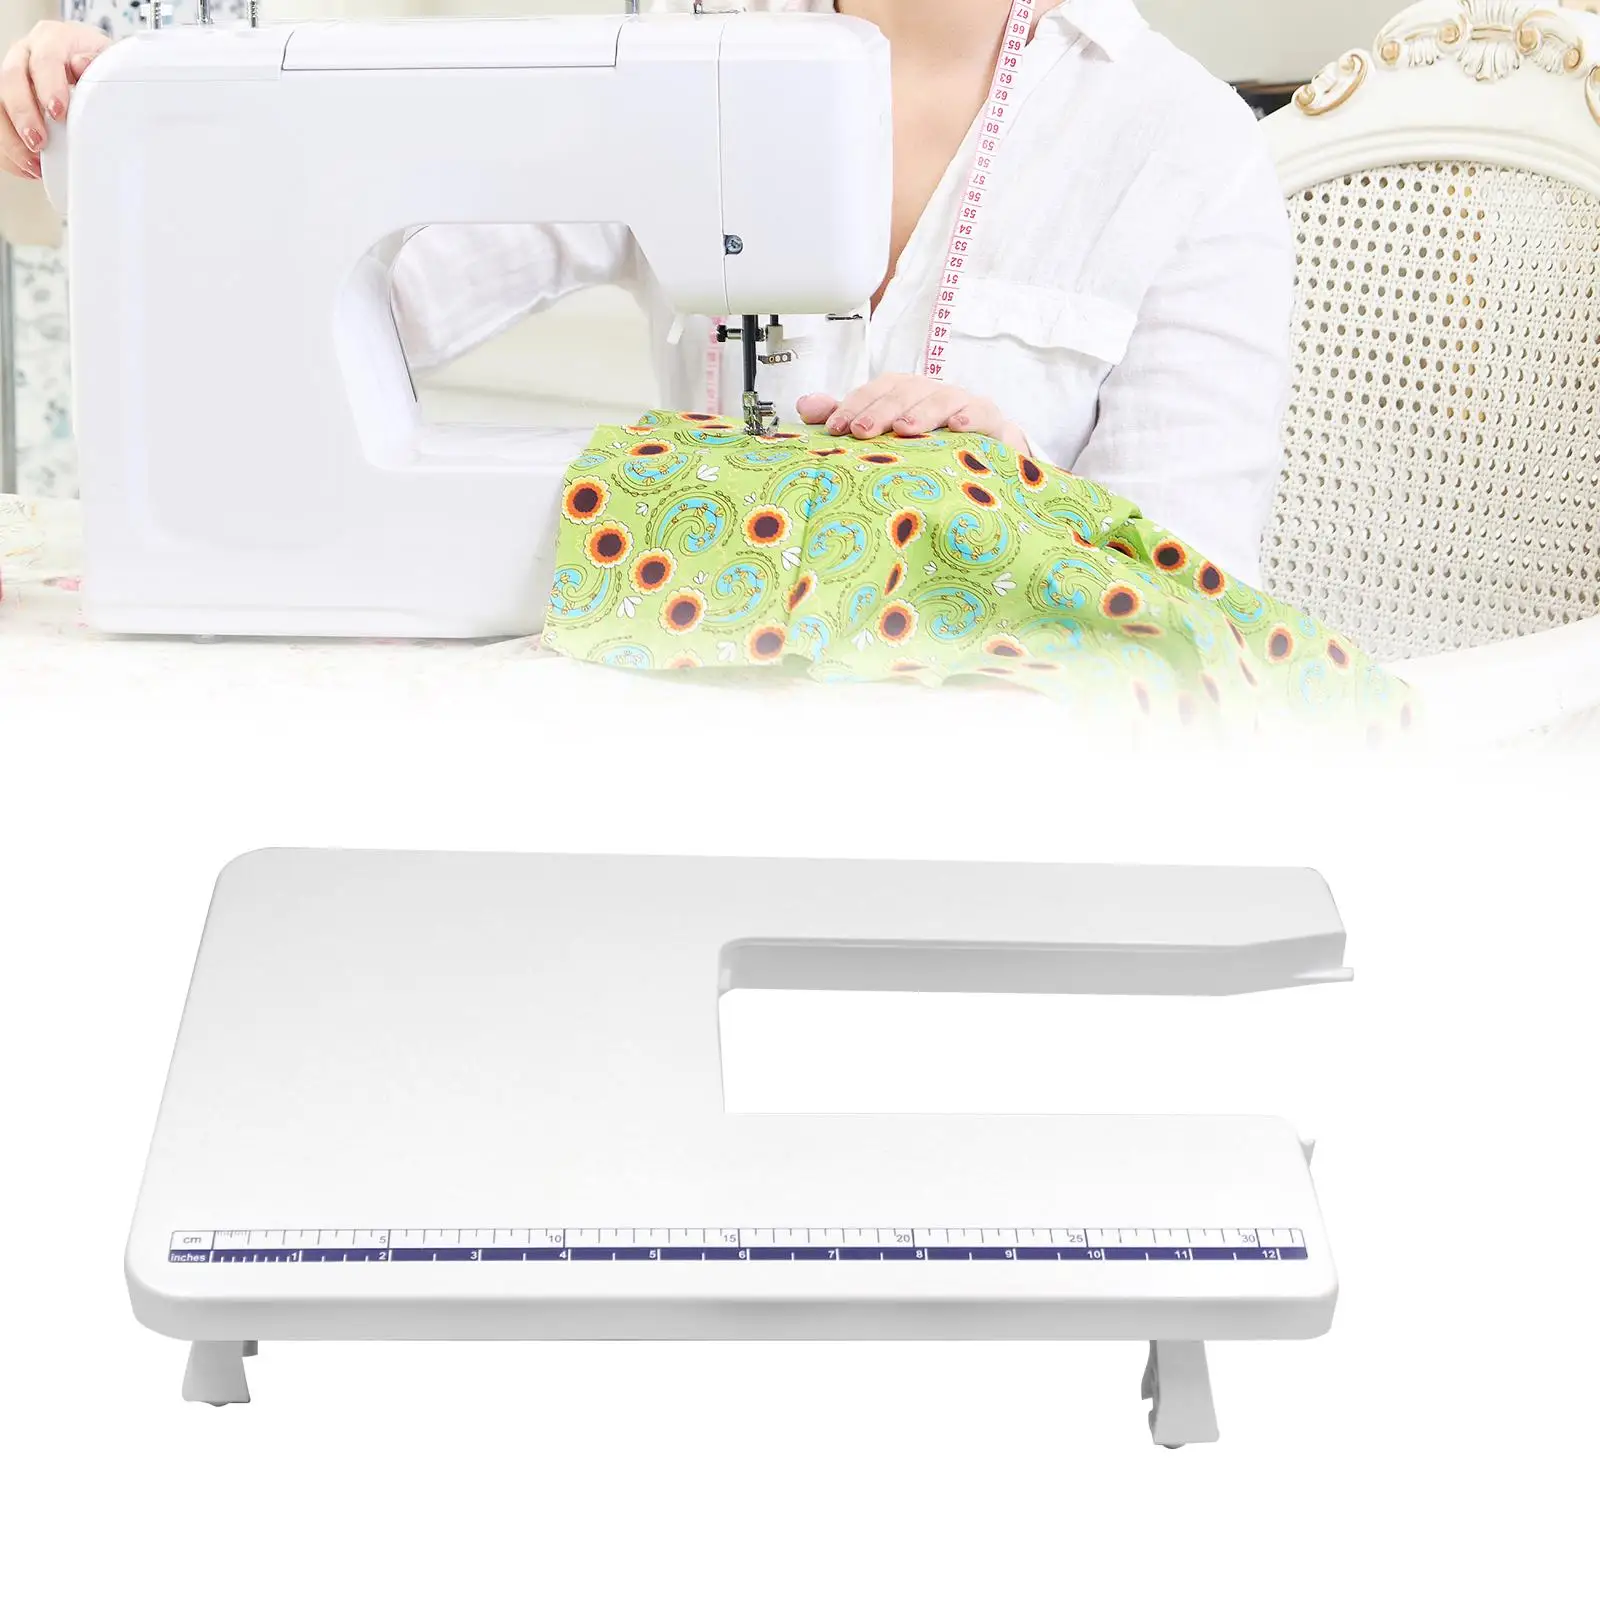 Portable Extension Table for Sewing Machine, Heavy Duty Sewing Machine Accessories, Sturdy Sewing Machine Board for Sewing